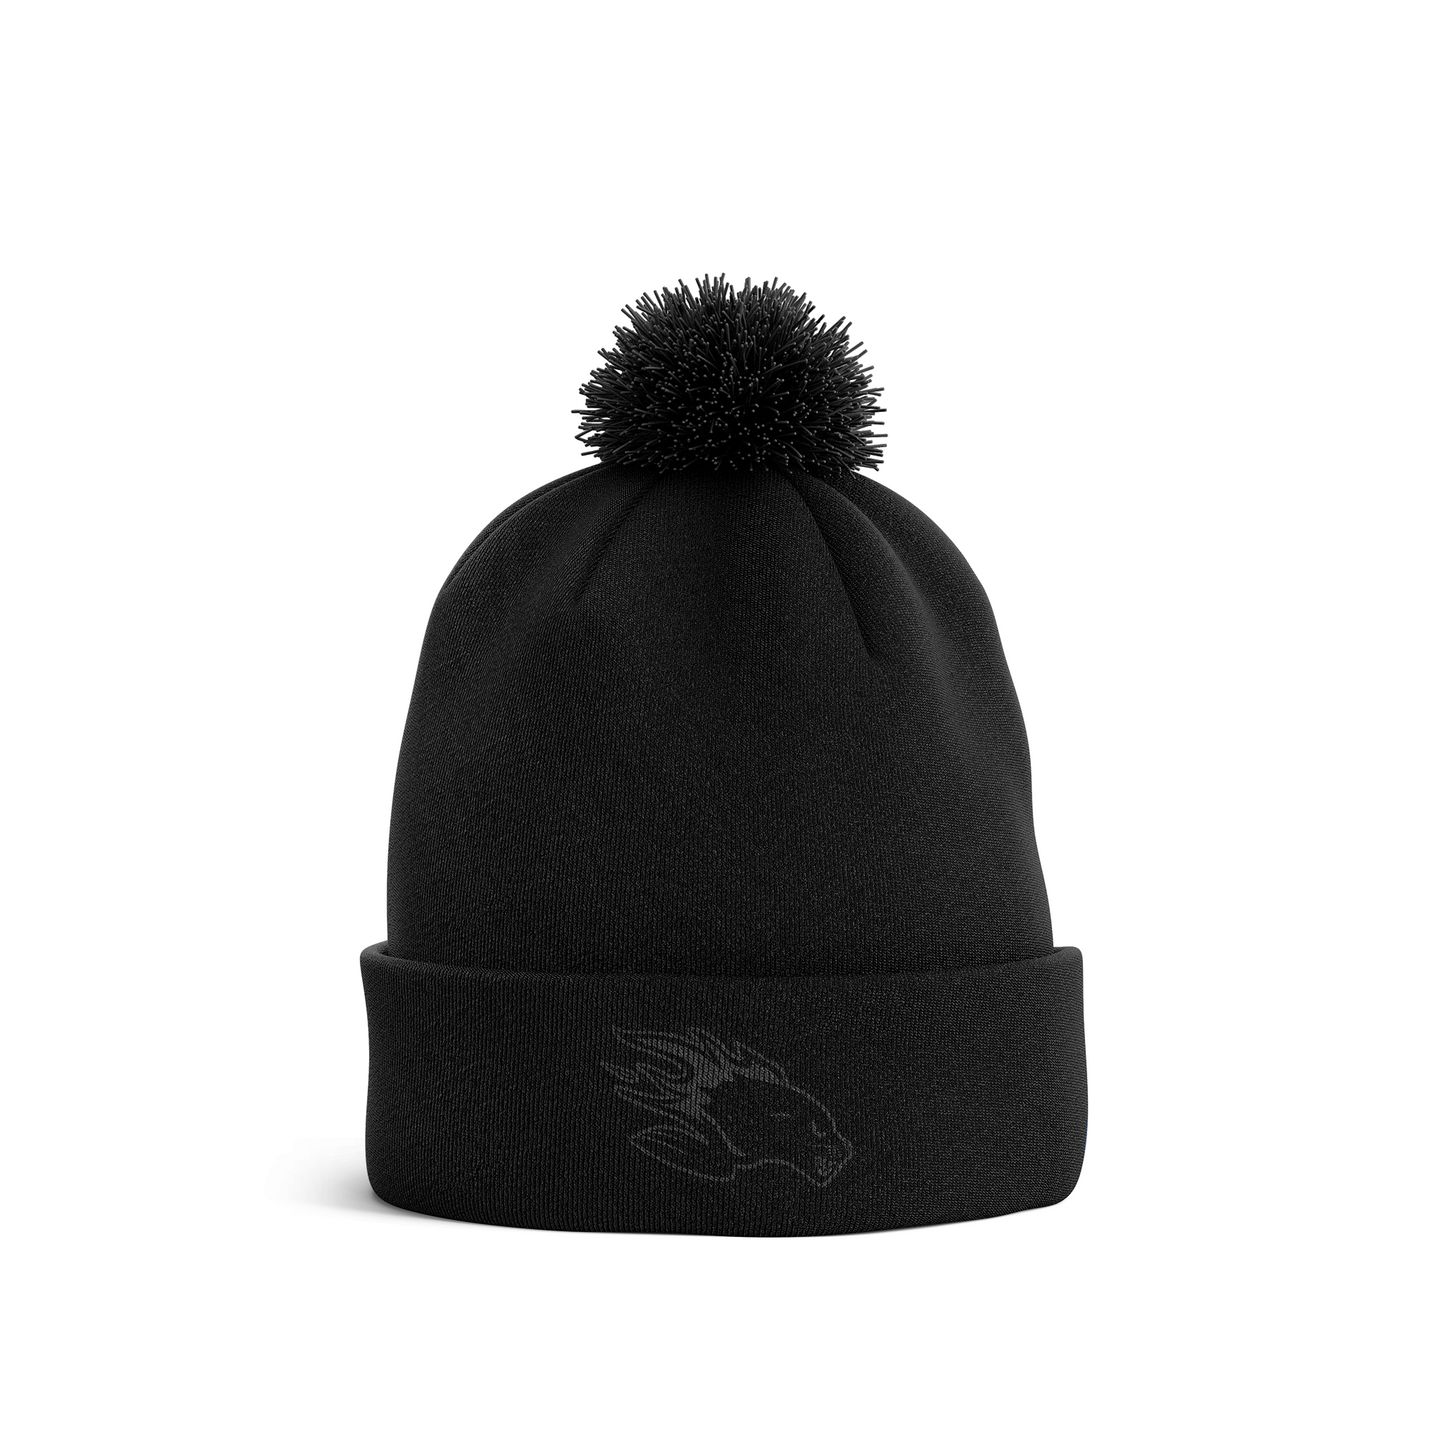 All Black Toque - Youth